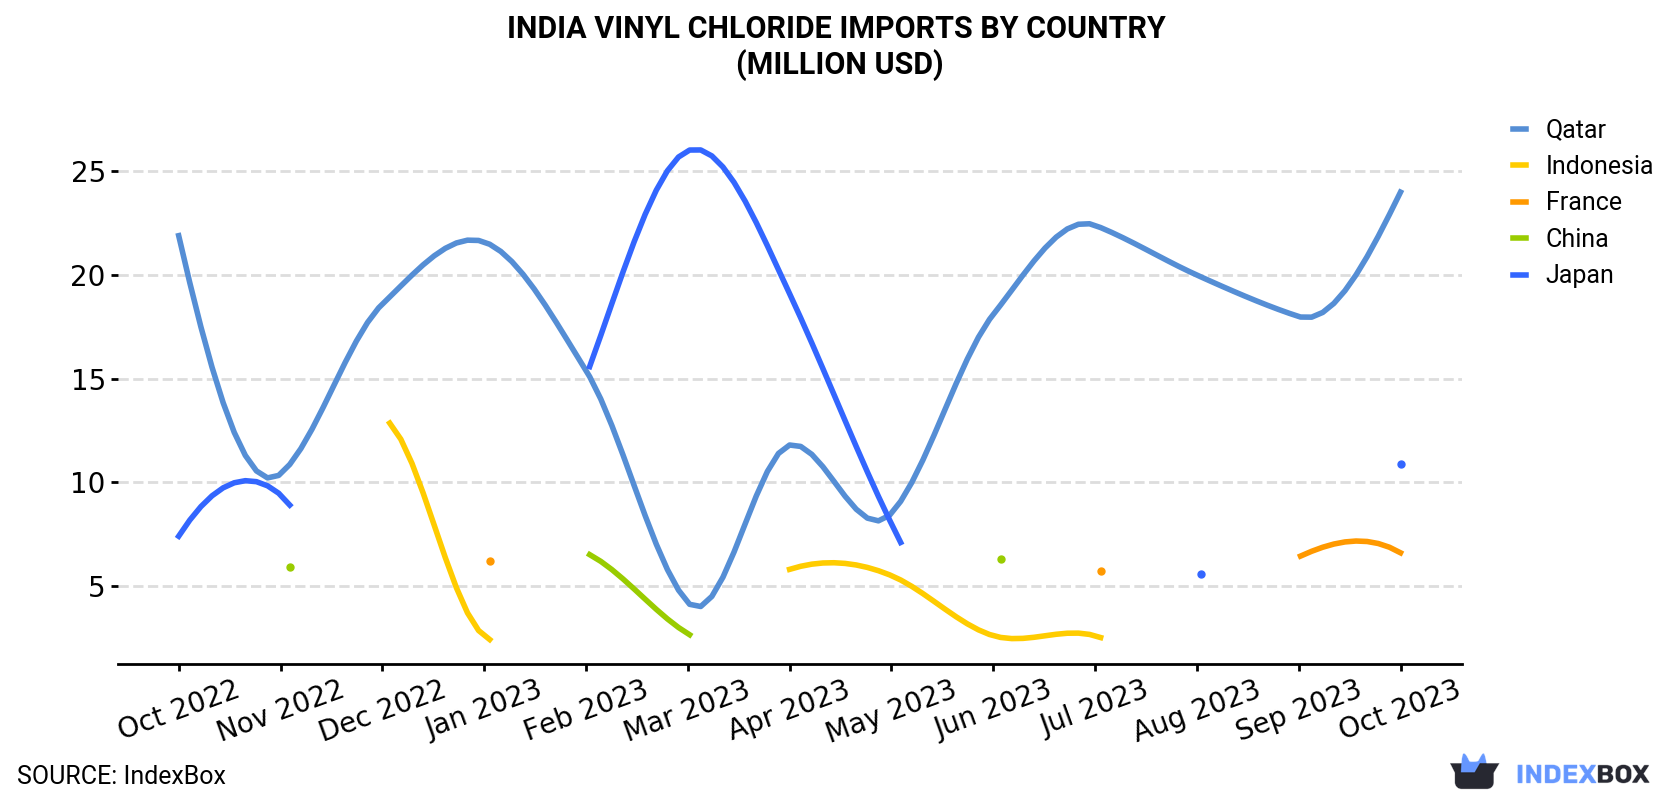 India Vinyl Chloride Imports By Country (Million USD)